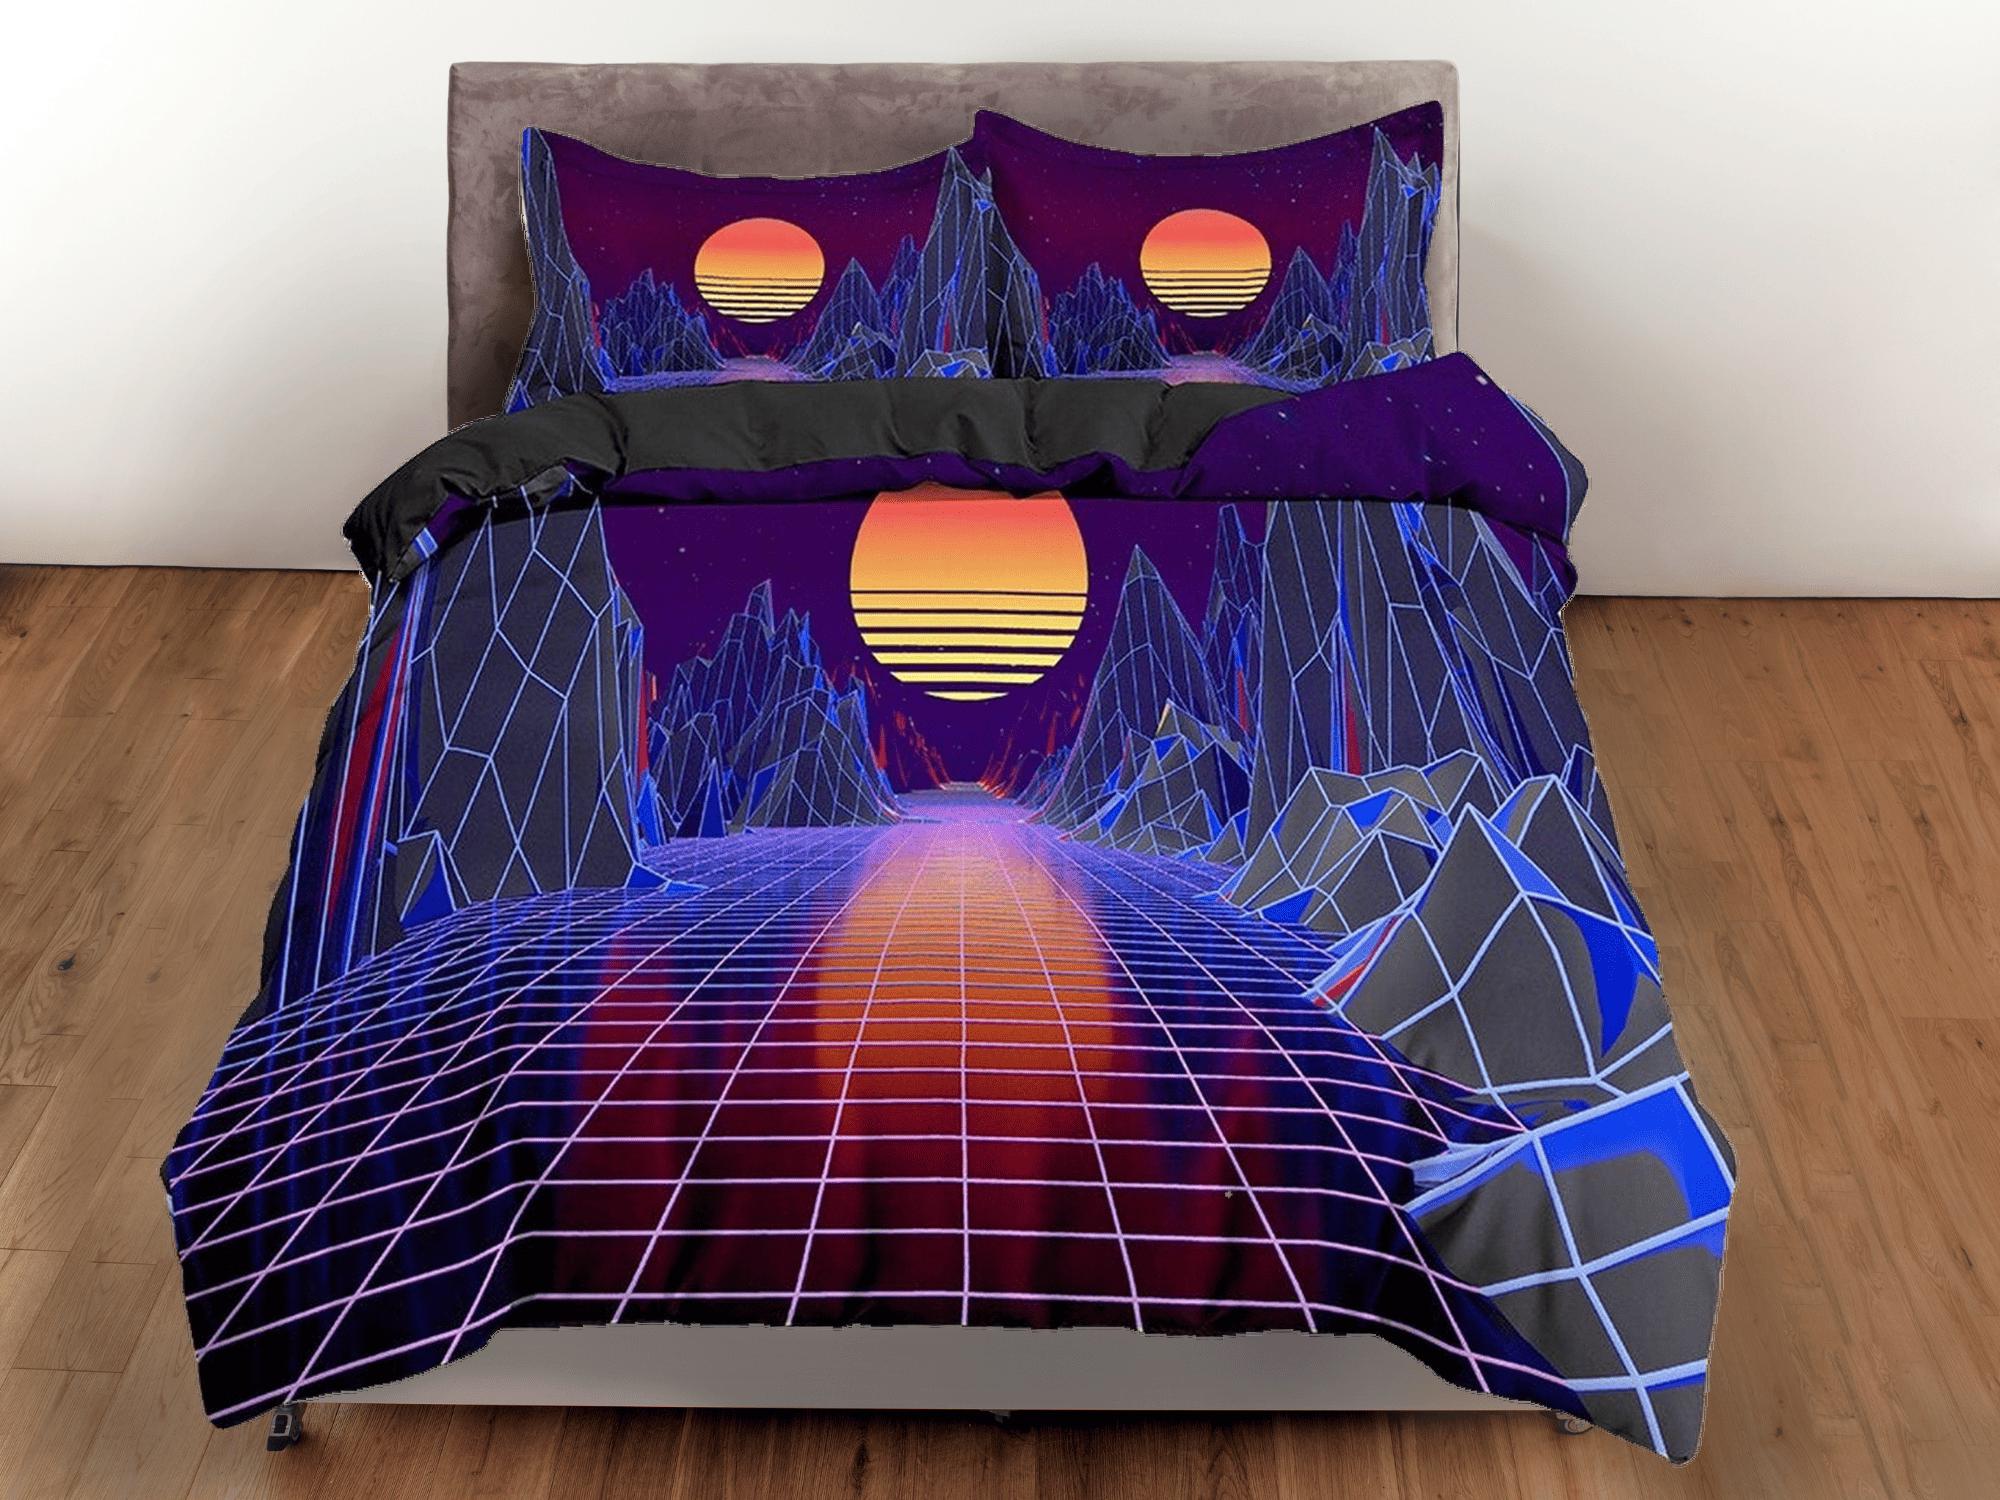 daintyduvet Dark Colored Vaporwave Bedding with Mountains and Sunset, Cool Hippie Duvet Cover Set for Boys Bedroom, Trippy Psychedelic Bed Cover 90s